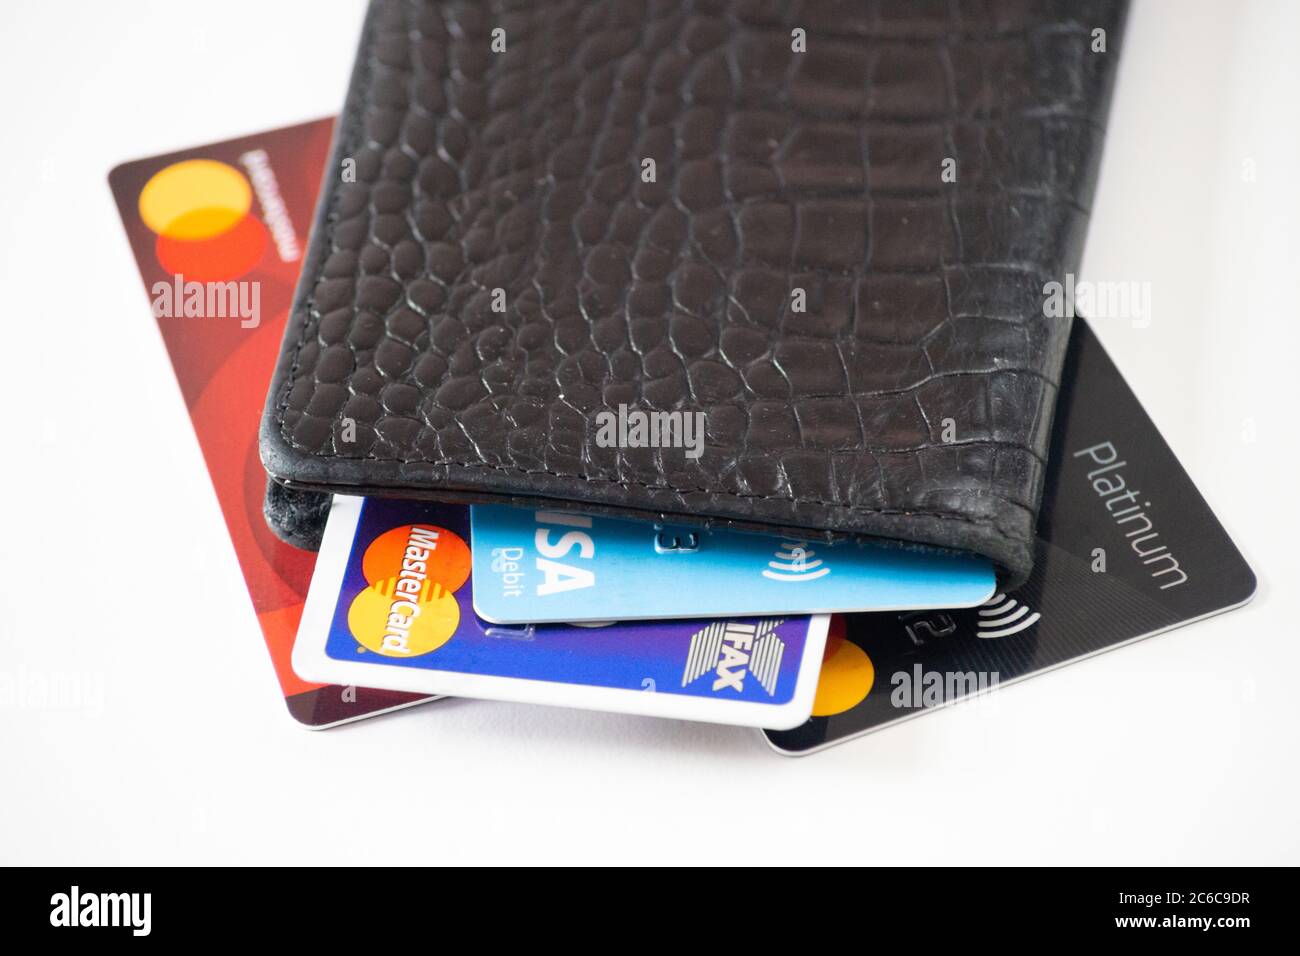 Closed wallet or purse with cards, debit, credit, bank - concept for cashless, no cash, no physical money, move towards cashless society, contactless Stock Photo